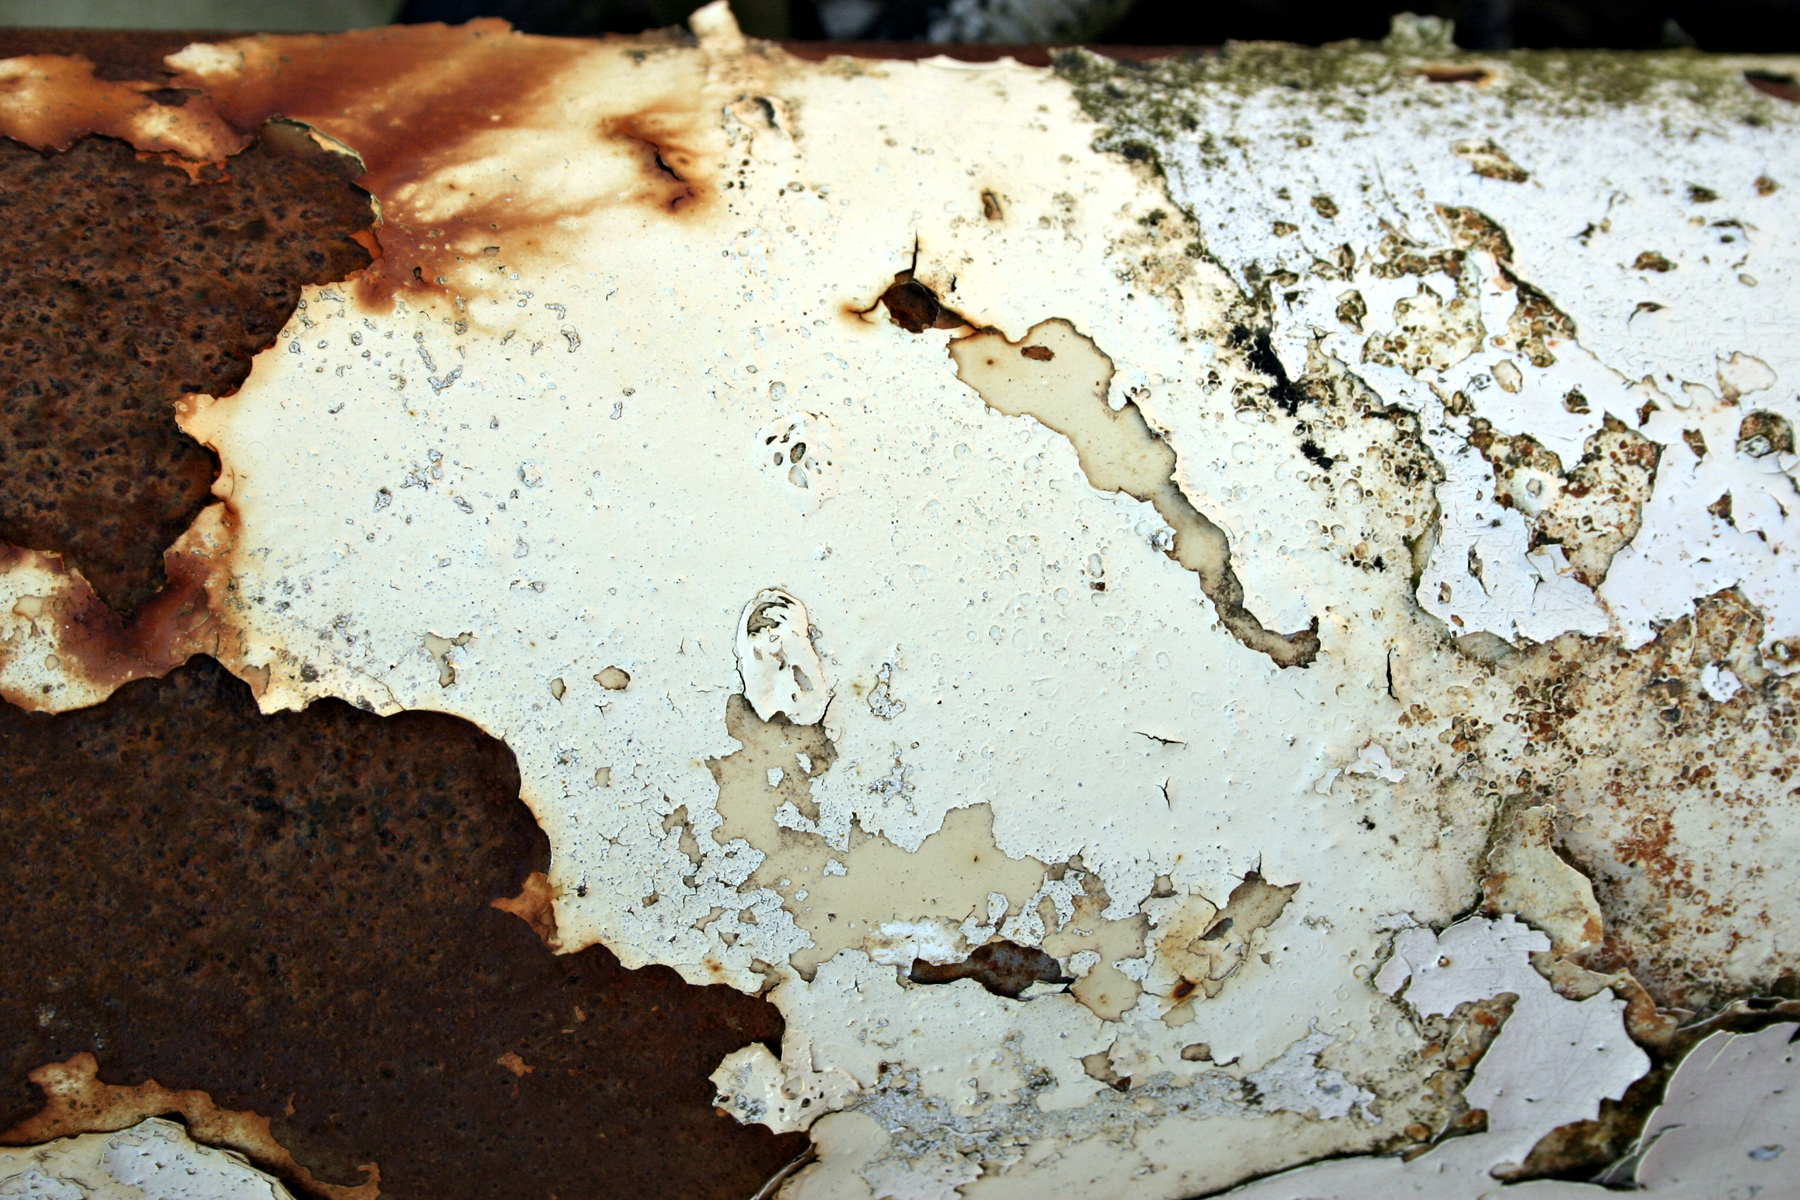 Rusted surface photo